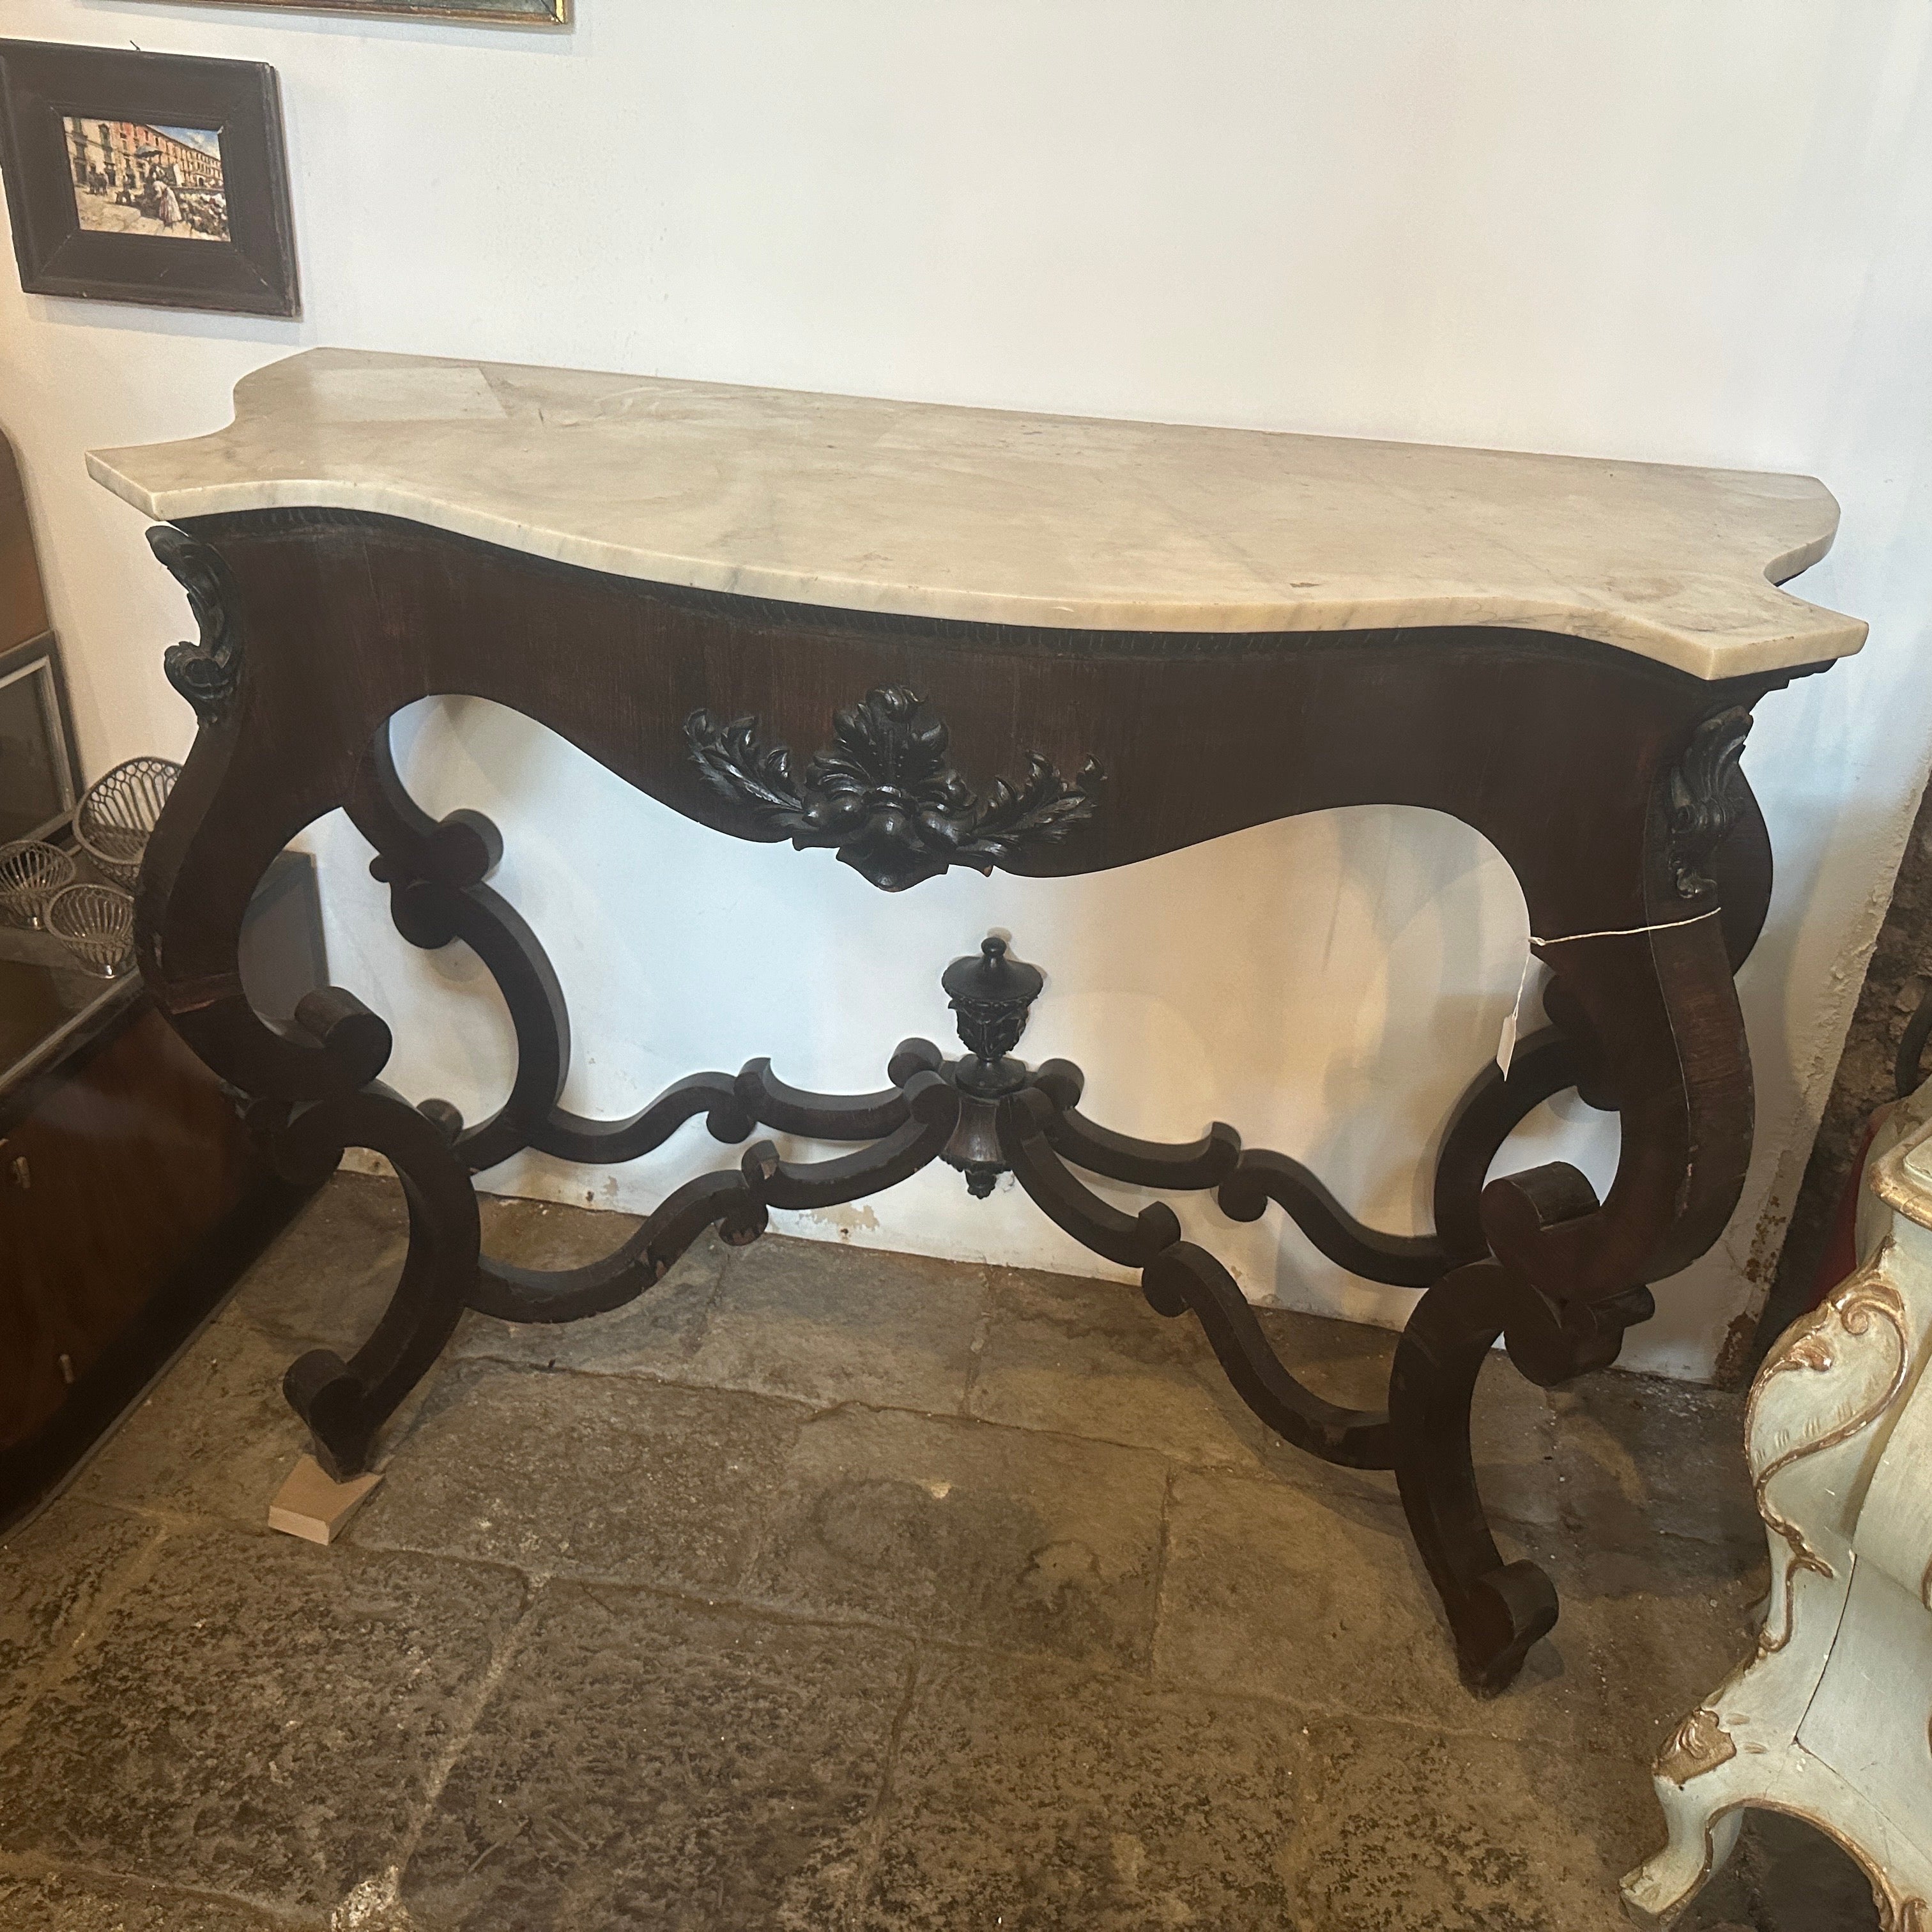 A Louis Philippe consolle hand-crafted in Sicily in the mid 19th century, it's in lovely original conditions with normal signs considering age. Console is a piece of furniture that reflects the design and style of the Louis Philippe period, which